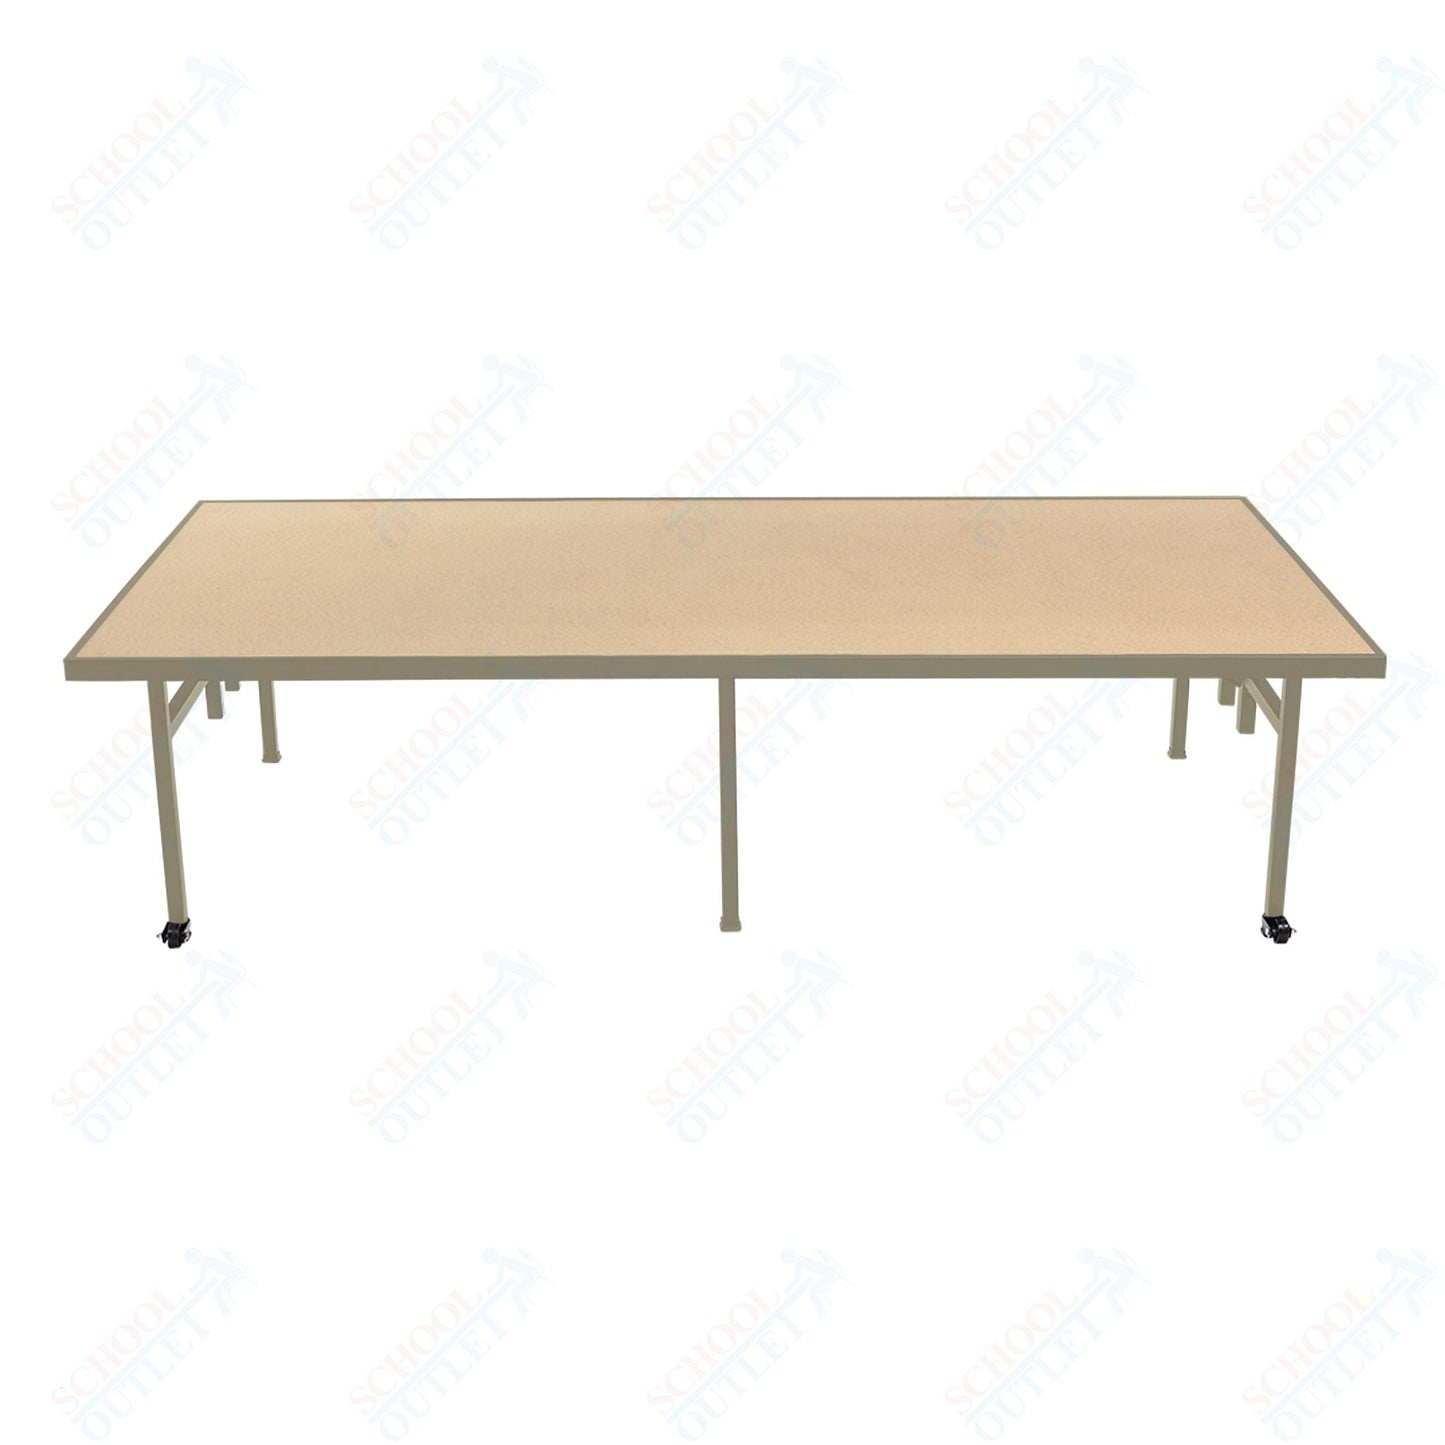 AmTab Fixed Height Stage - Hardboard Top - 48"W x 48"L x 24"H (AmTab AMT - ST4424H) - SchoolOutlet